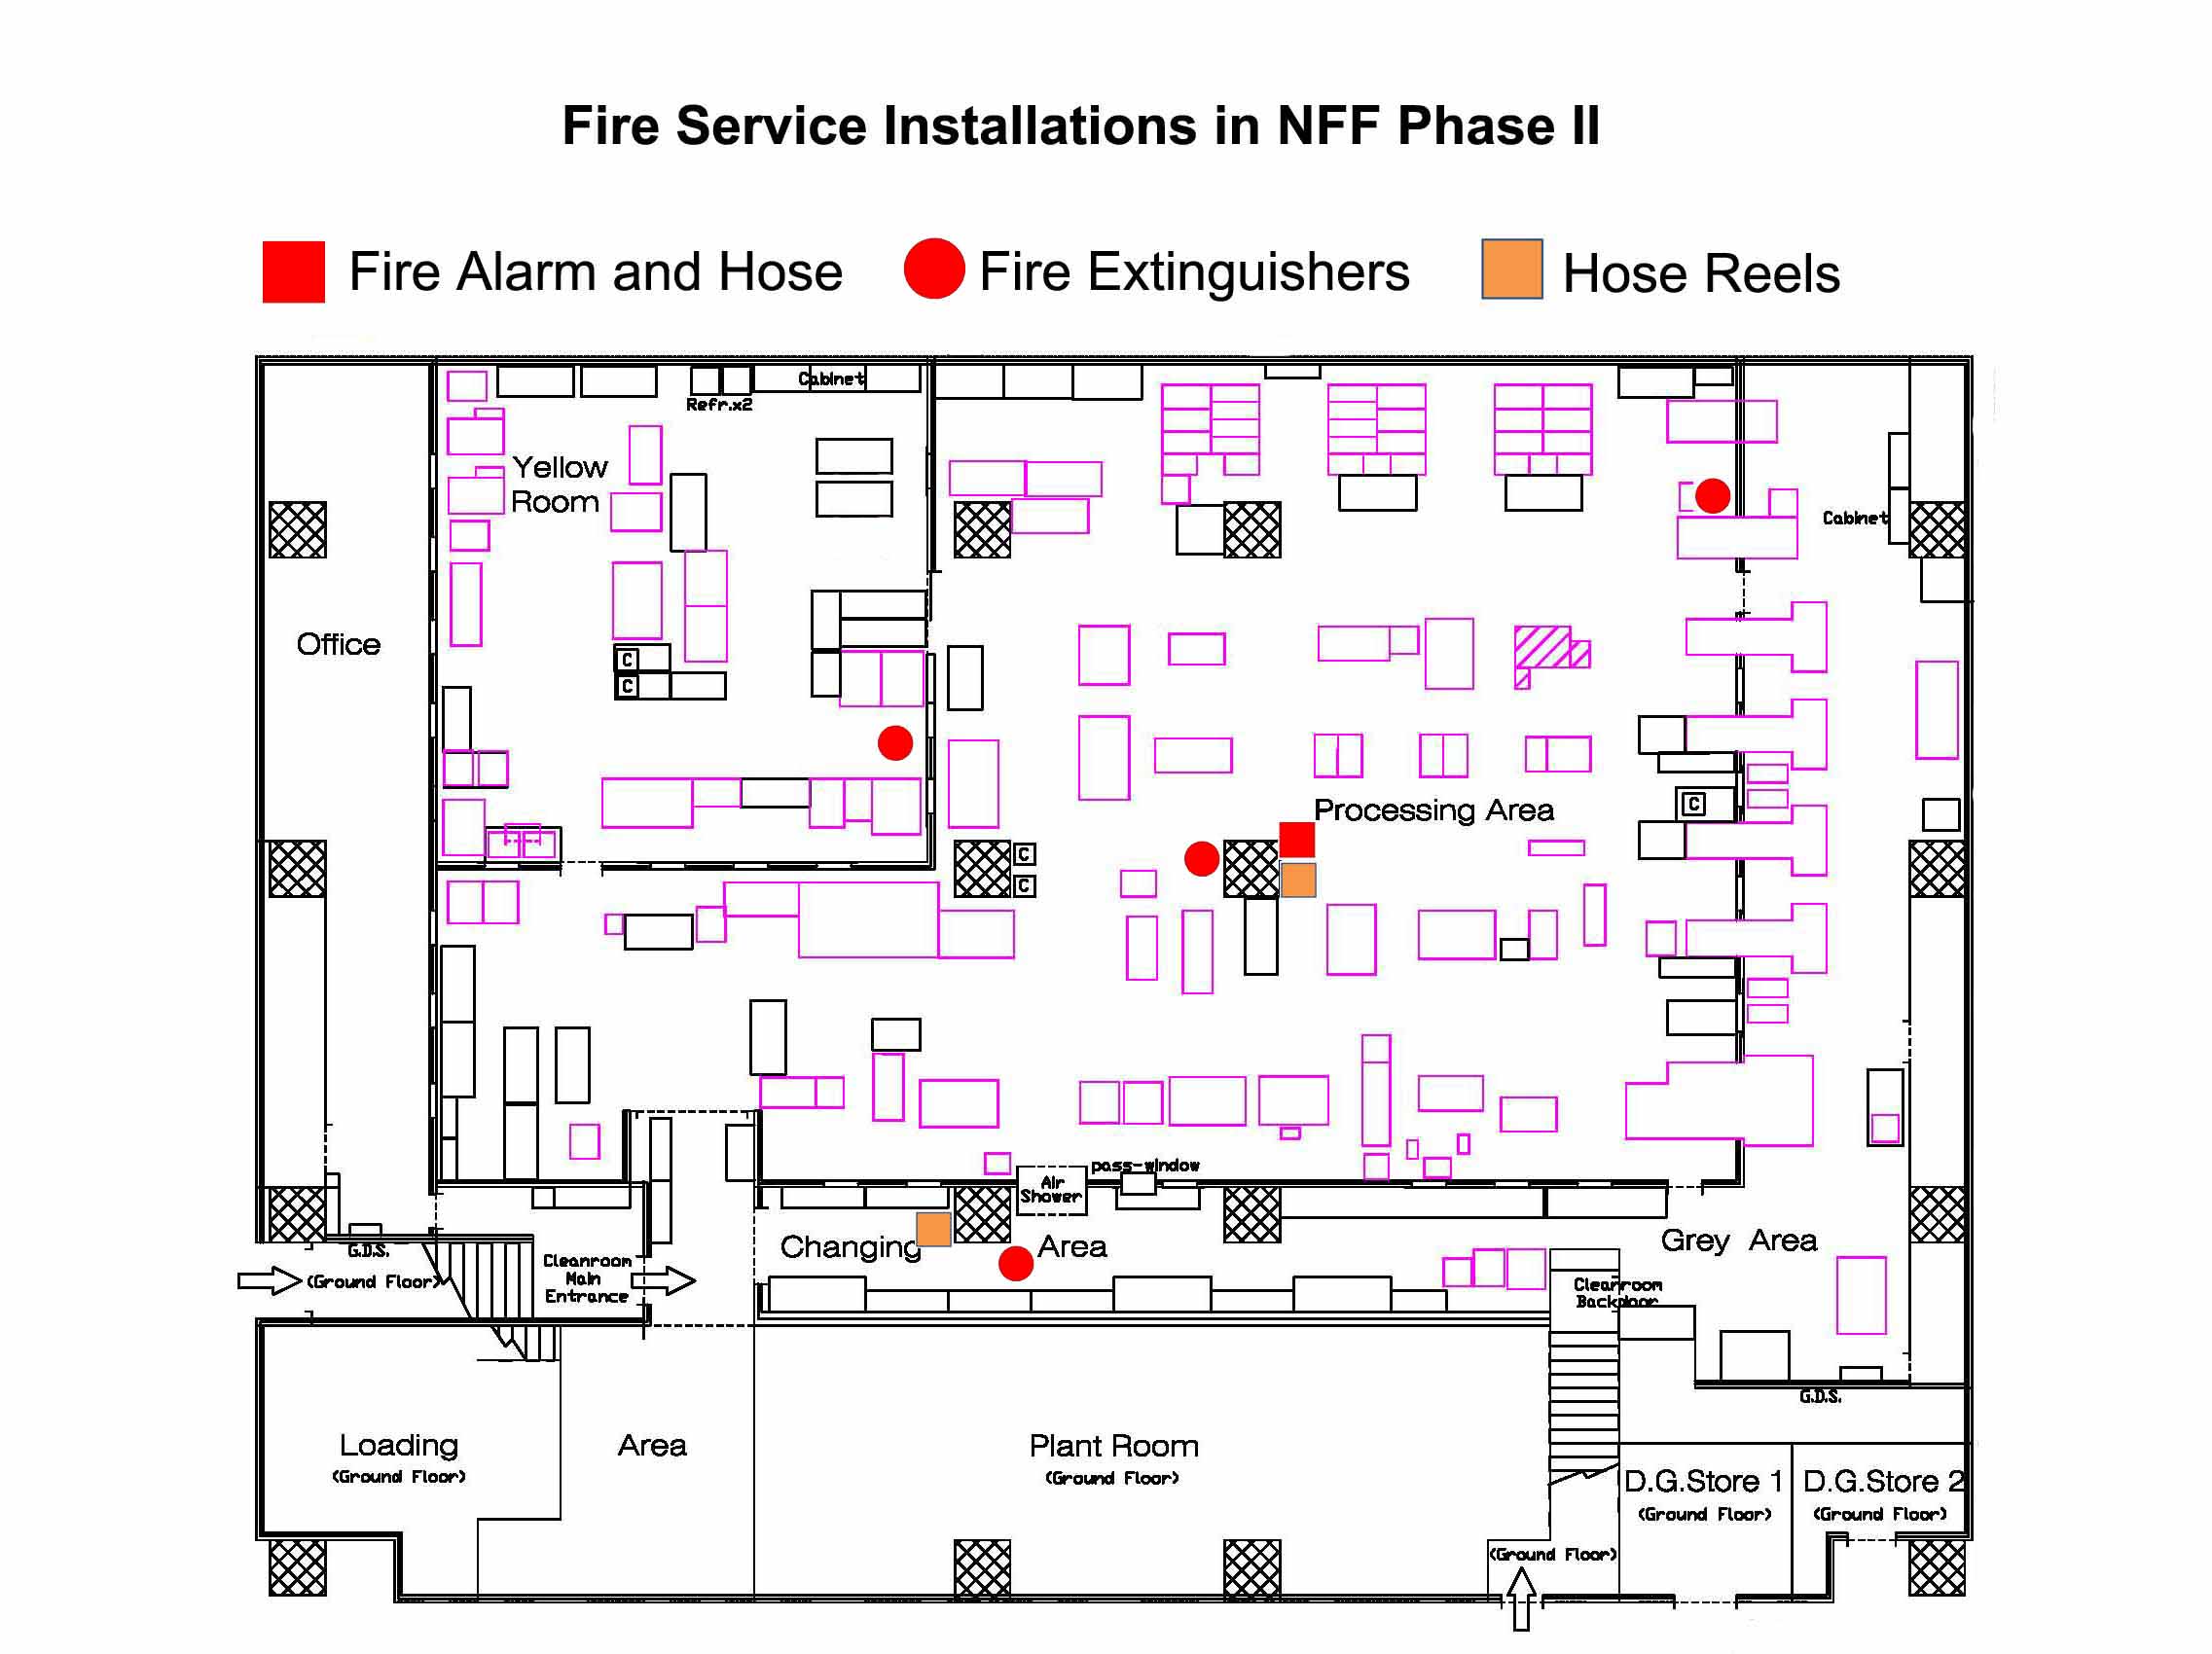 Fire Service Installations in NFF Phase II